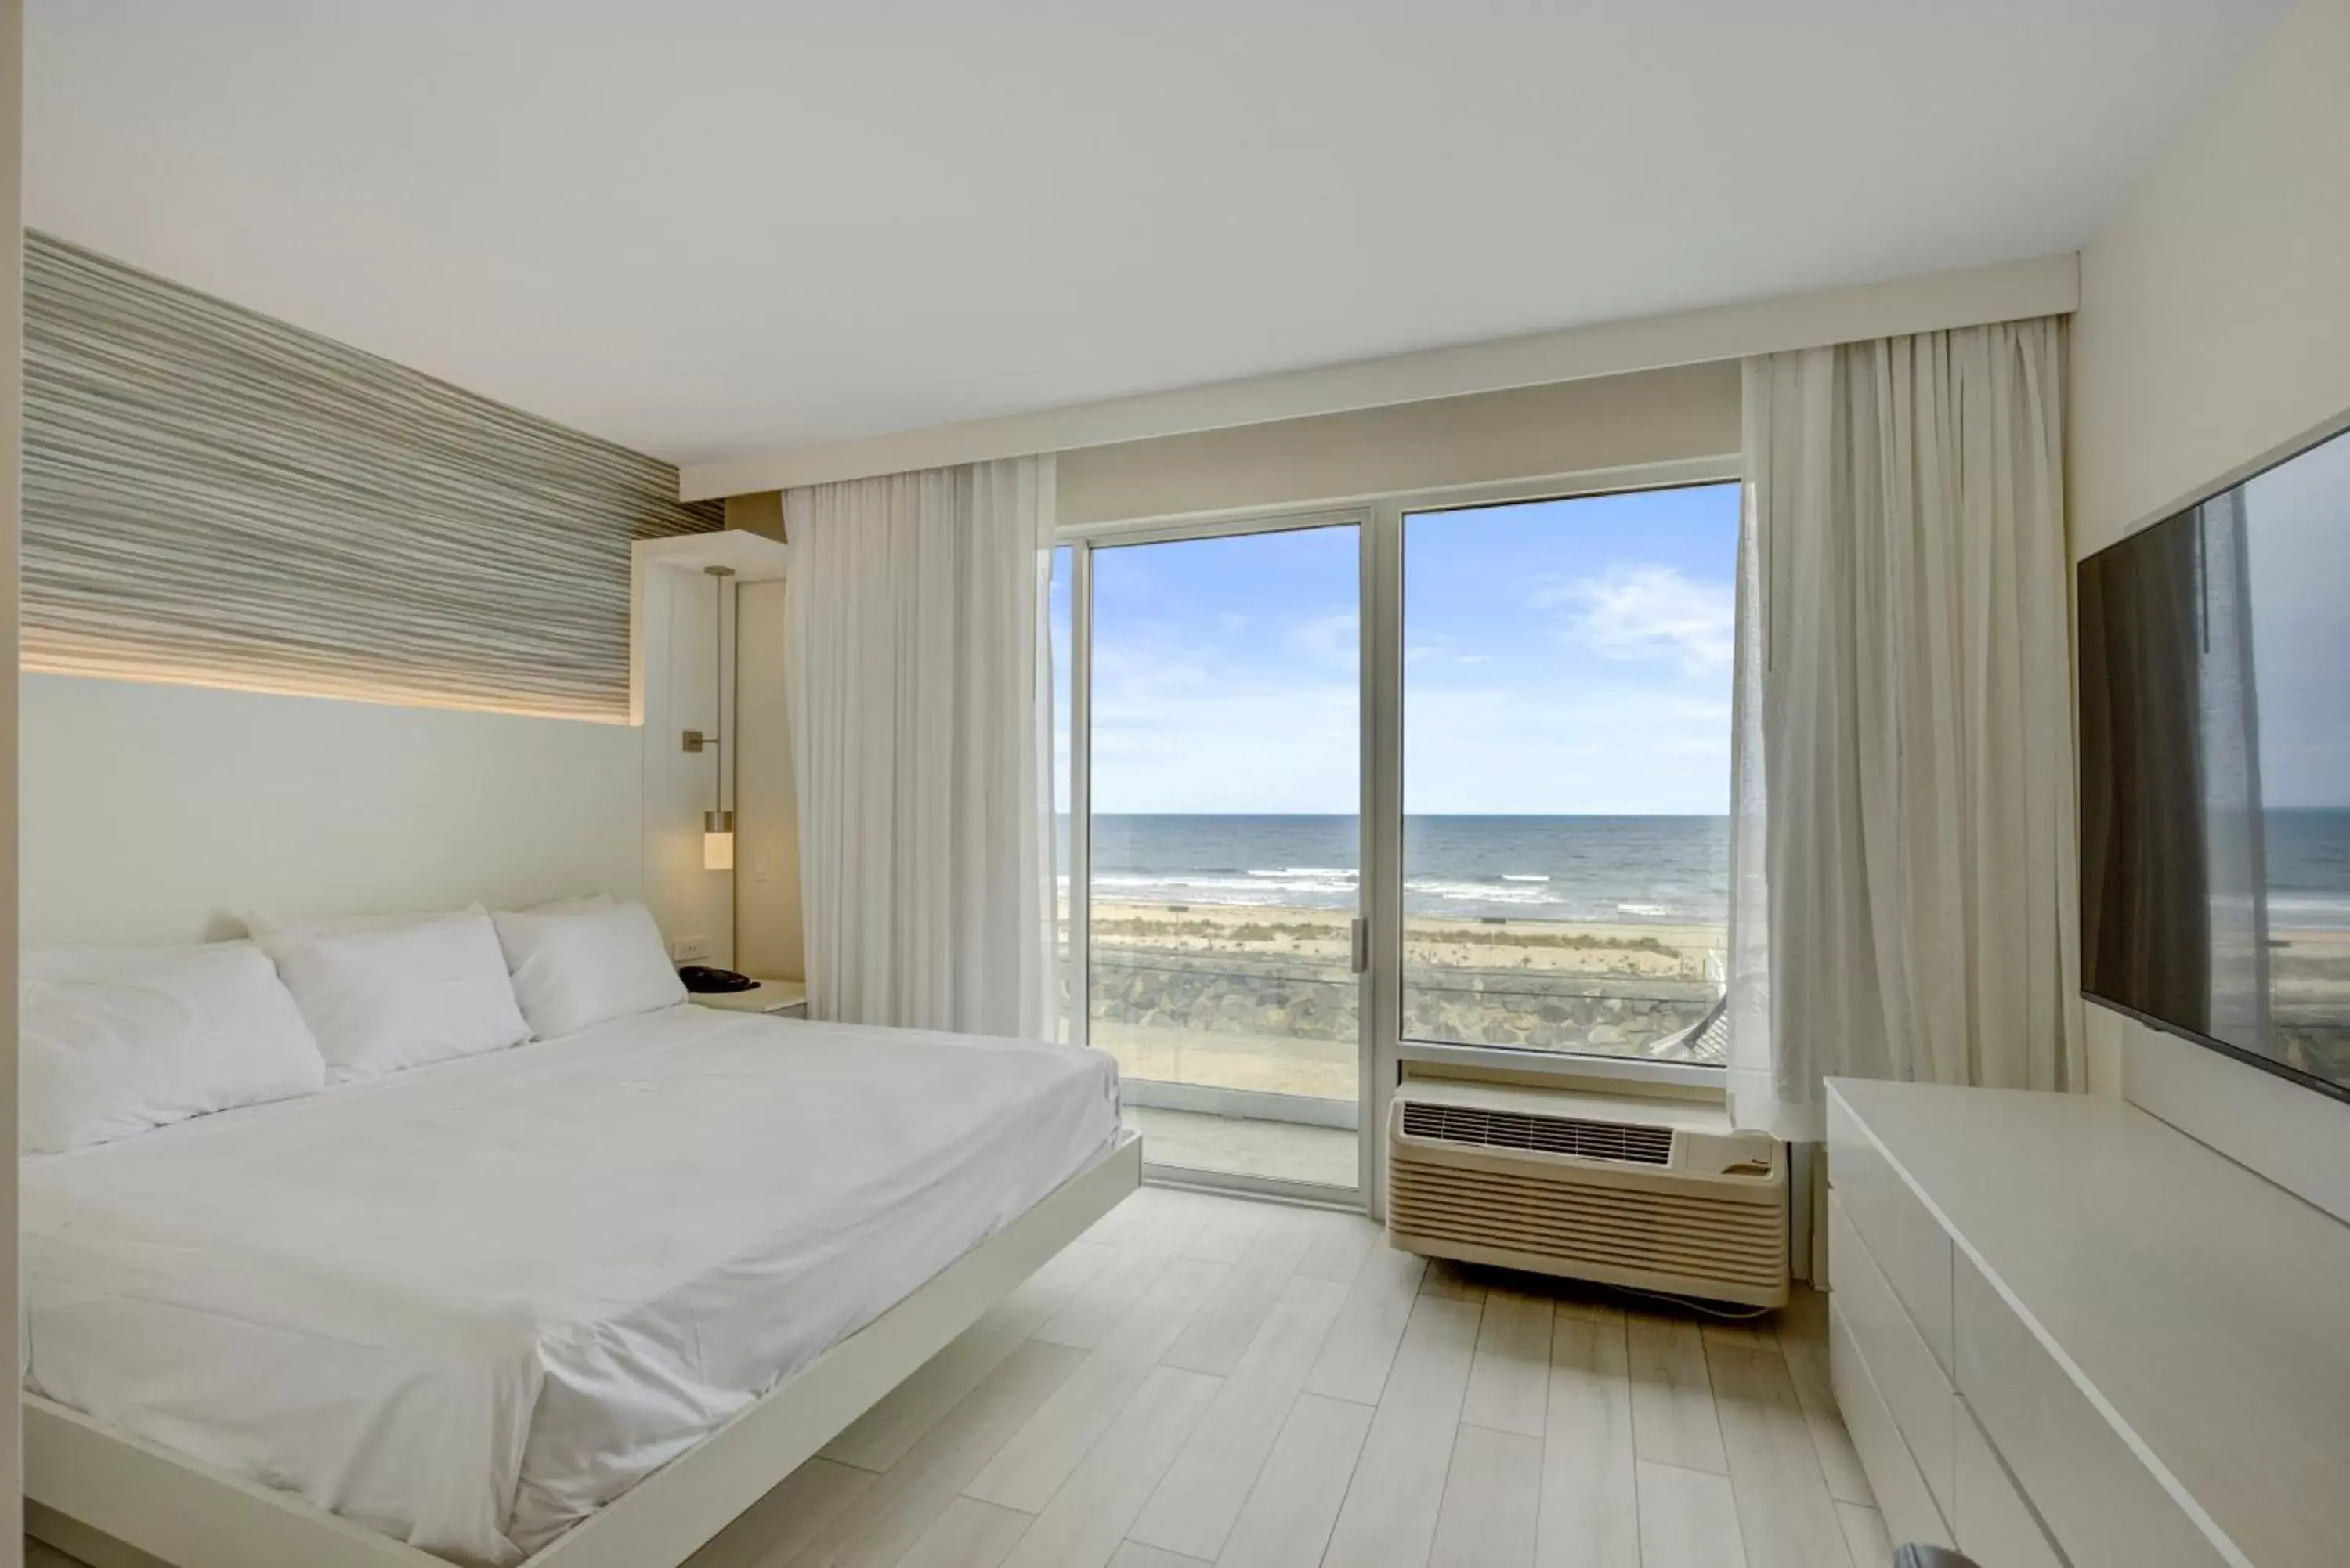 King Room with Balcony in BeachWalk at Sea Bright